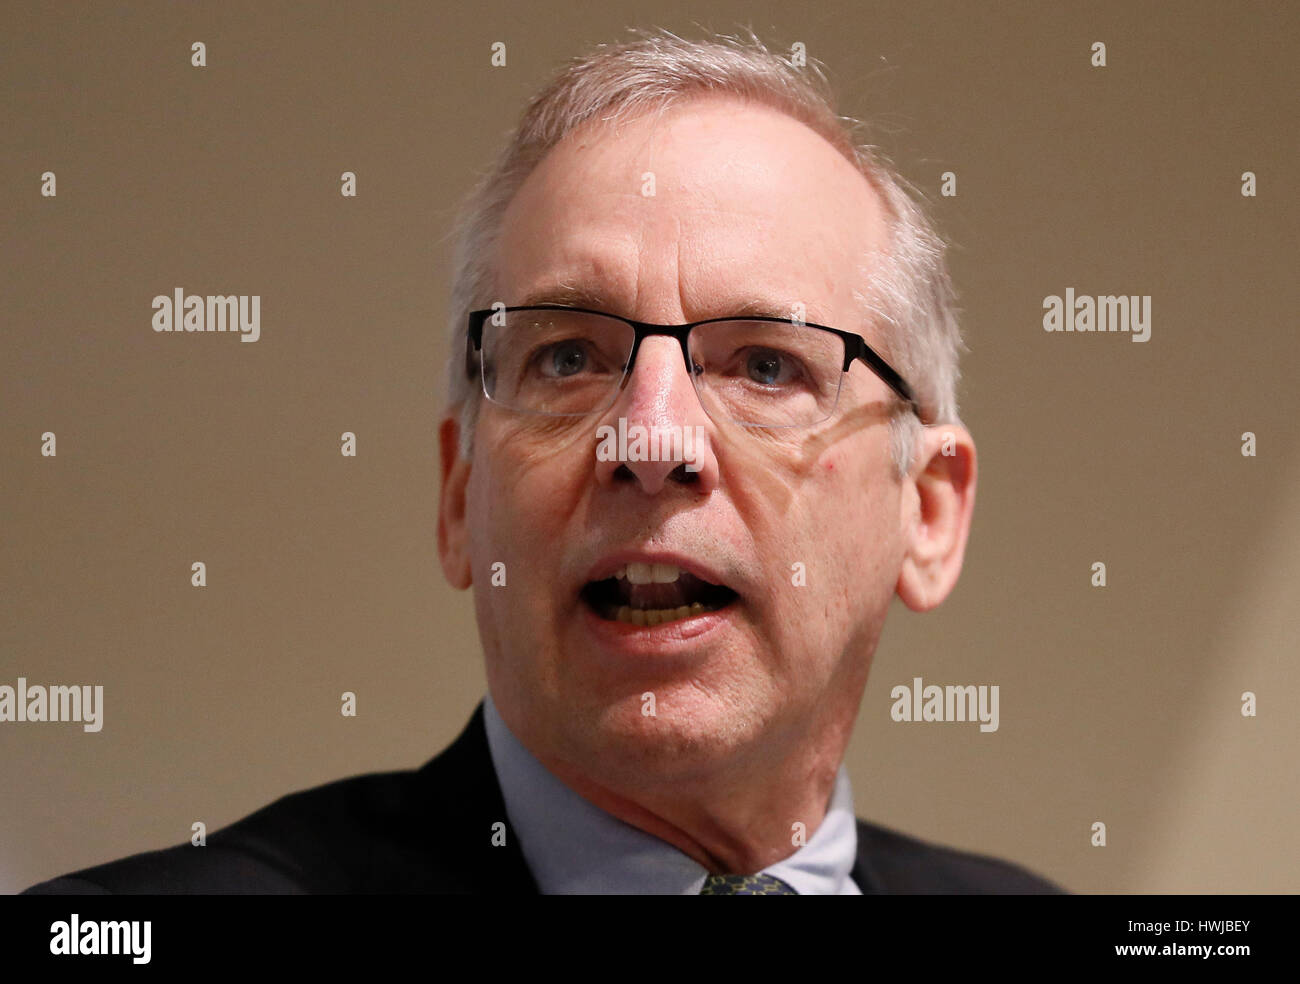 William C. Dudley, President and Chief Executive Officer of the Federal Reserve Bank of New York speaks during a panel discussion called 'Worthy of Trust? Law, Ethics and Culture in Banking', at The Bank of England in London. Stock Photo